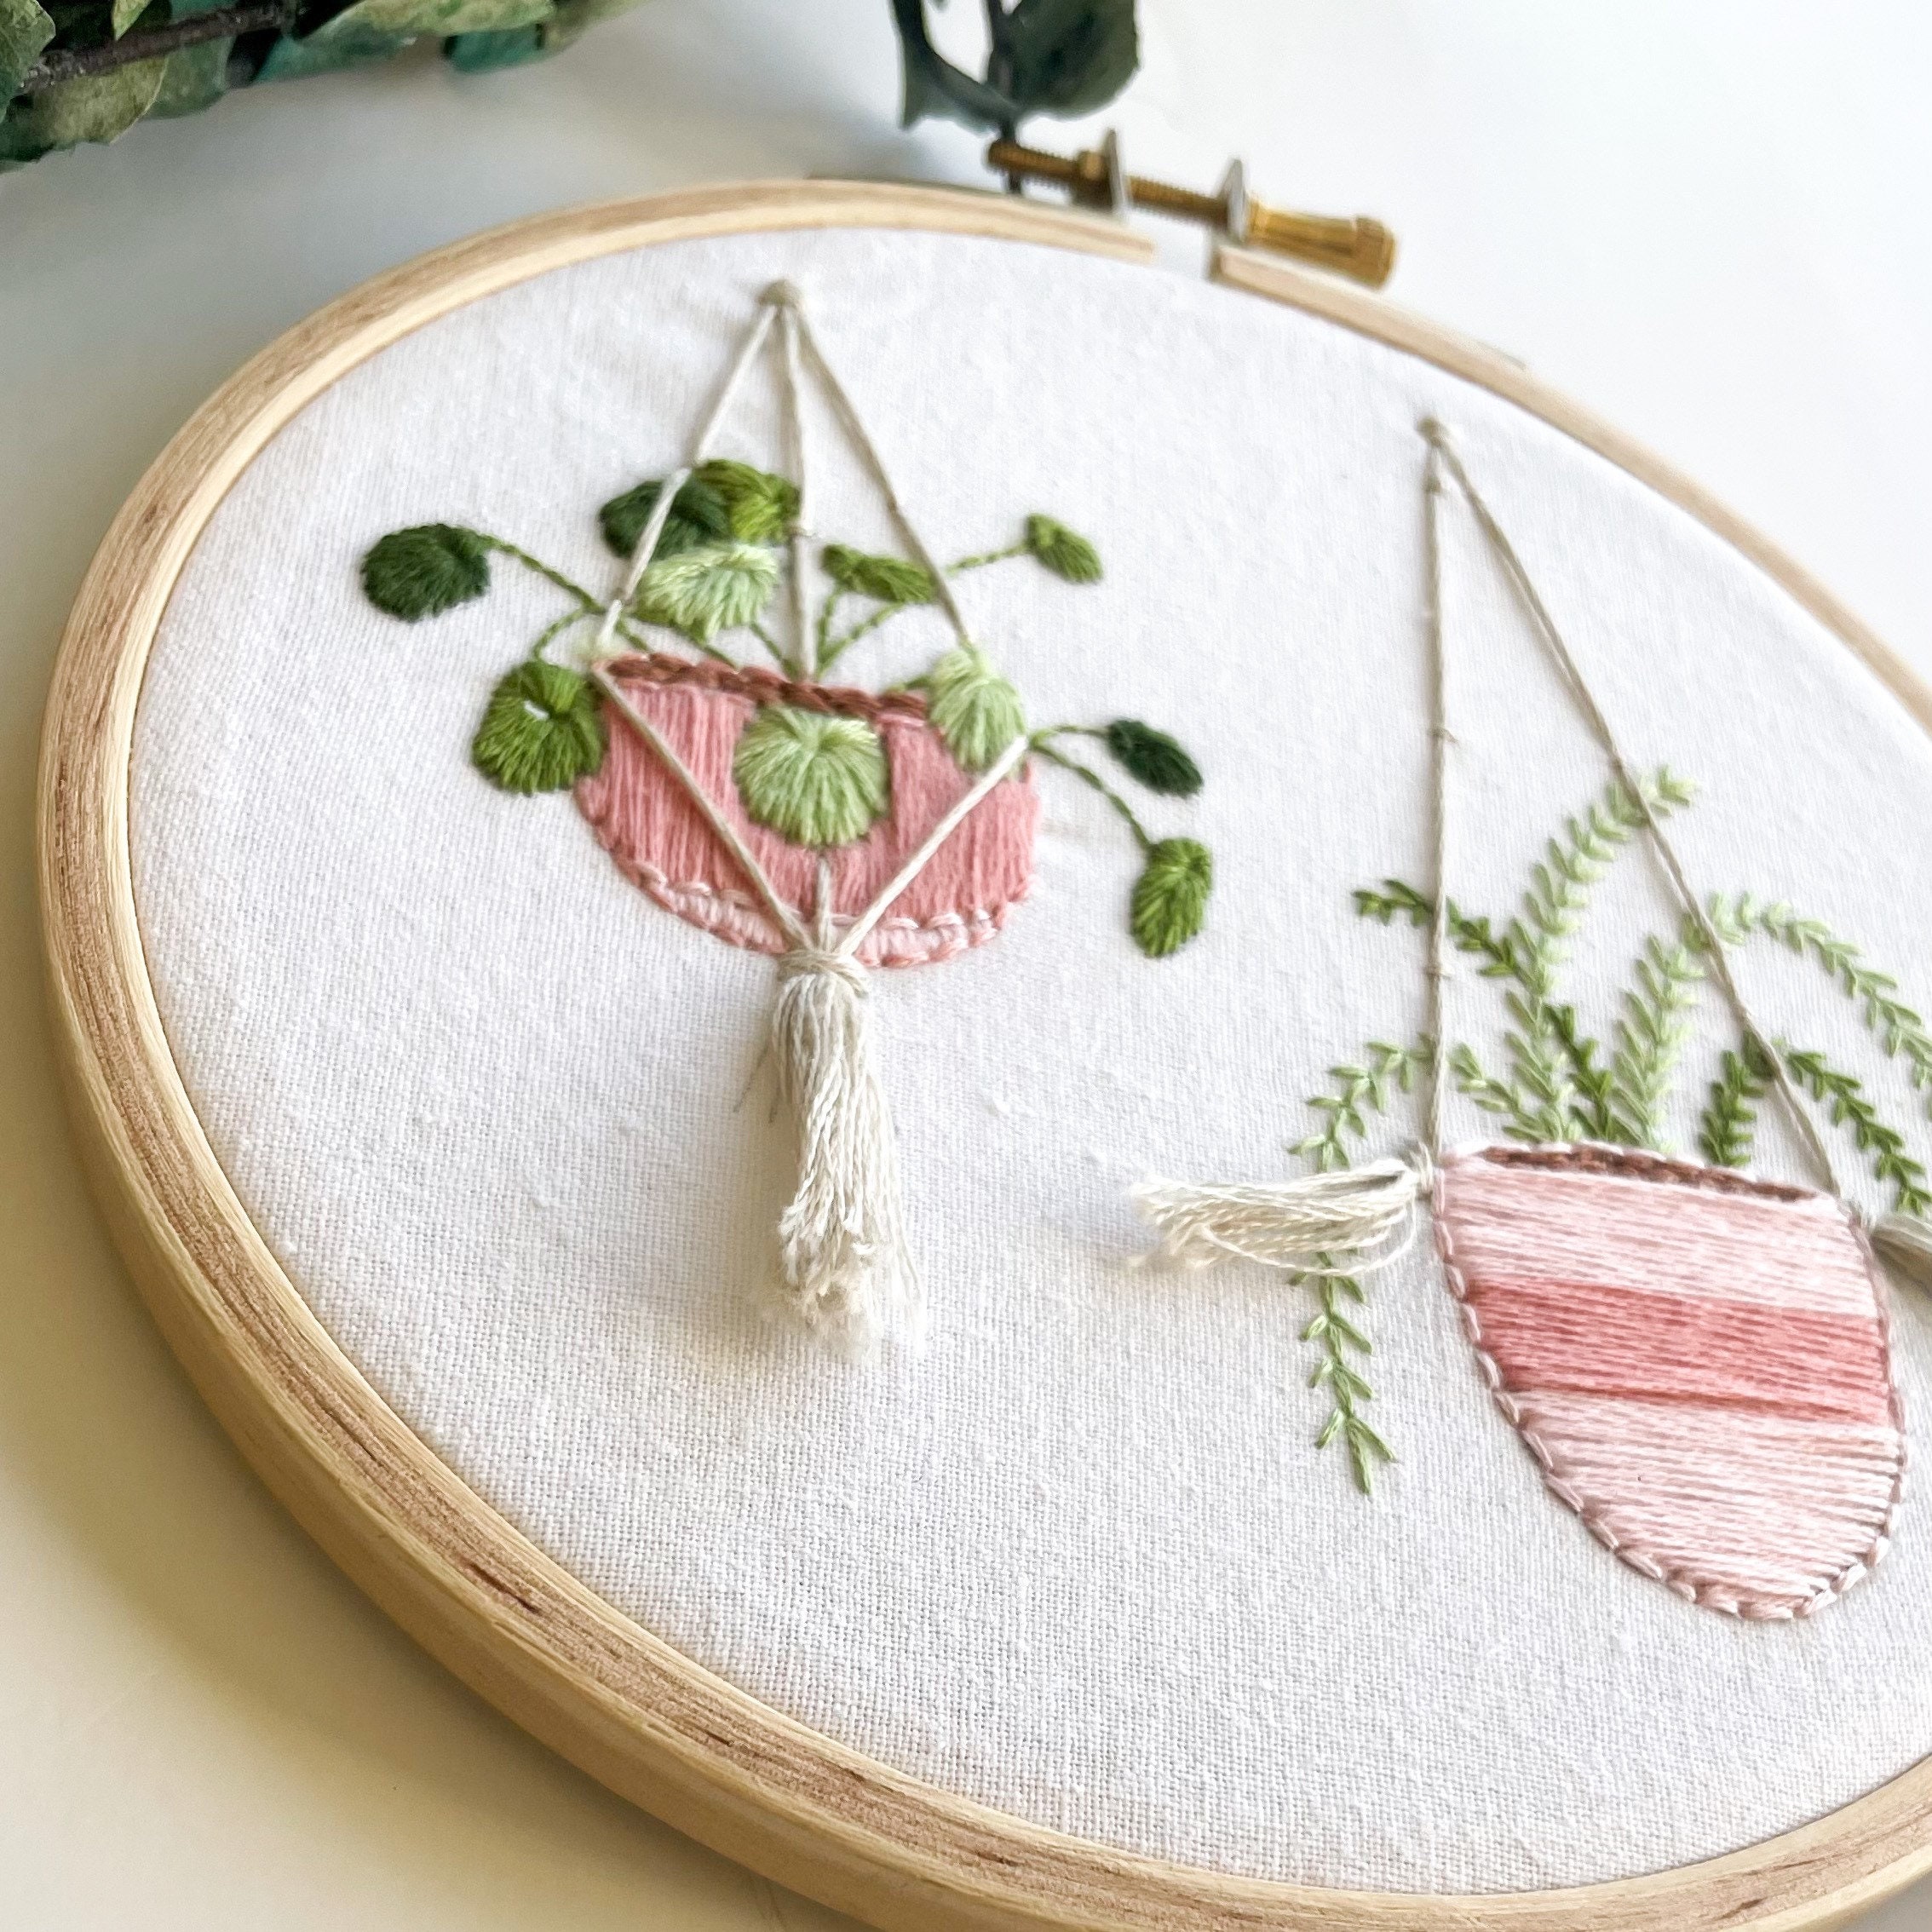 45+ Embroidery Gift Ideas (The BEST Gifts for Embroiderers!) - Adventures  of a DIY Mom